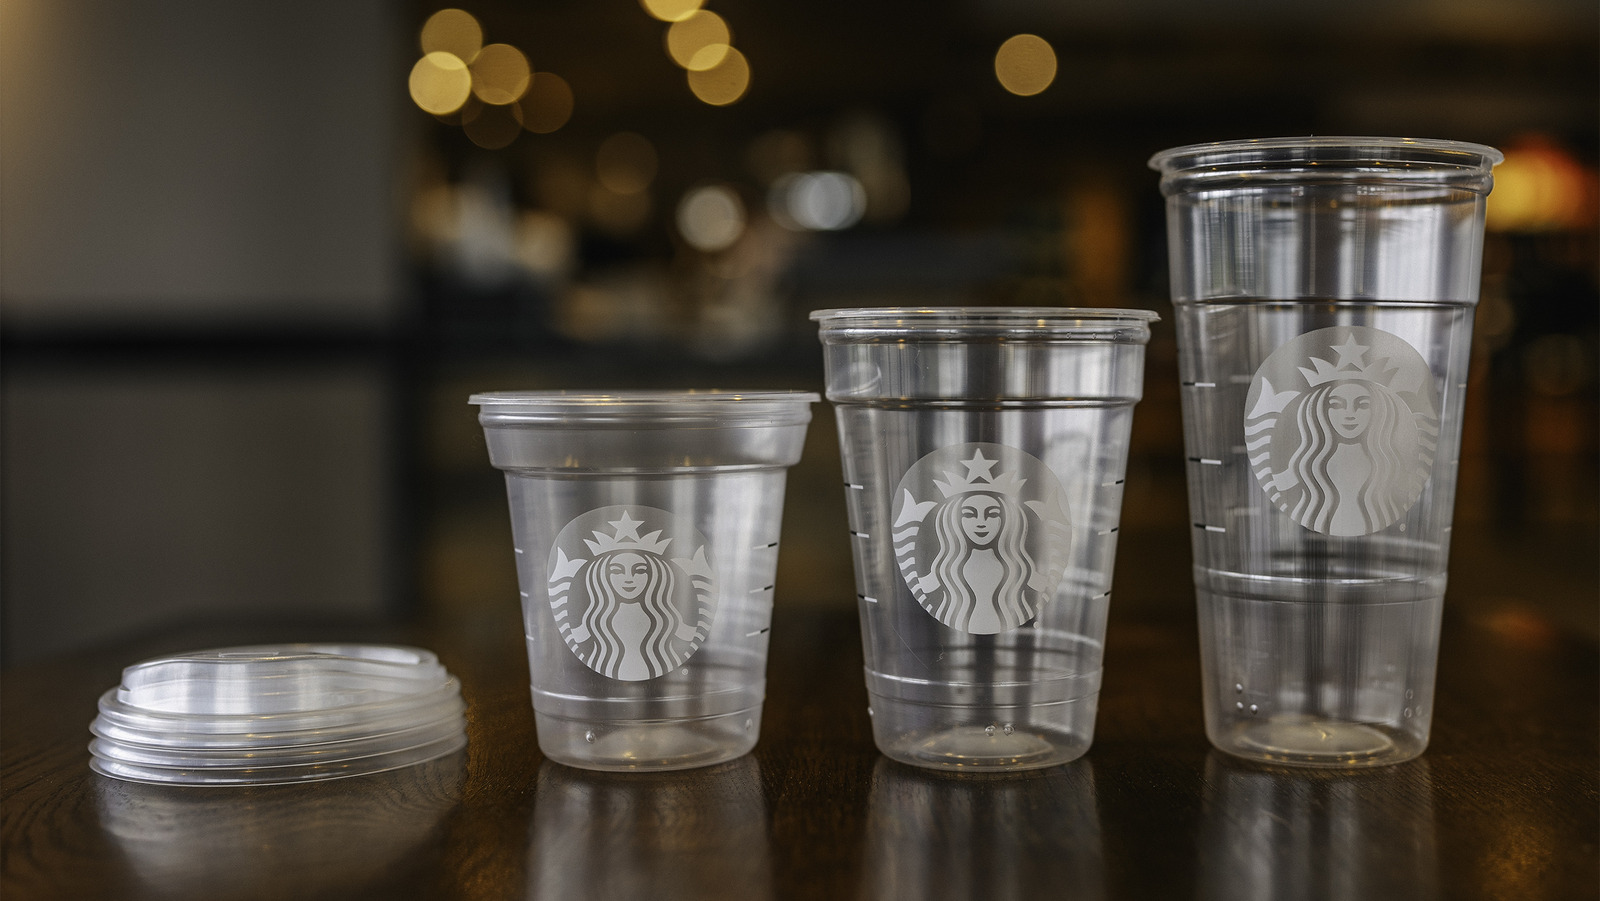 Starbucks Reveals New Cup Design In Order To Reduce Waste